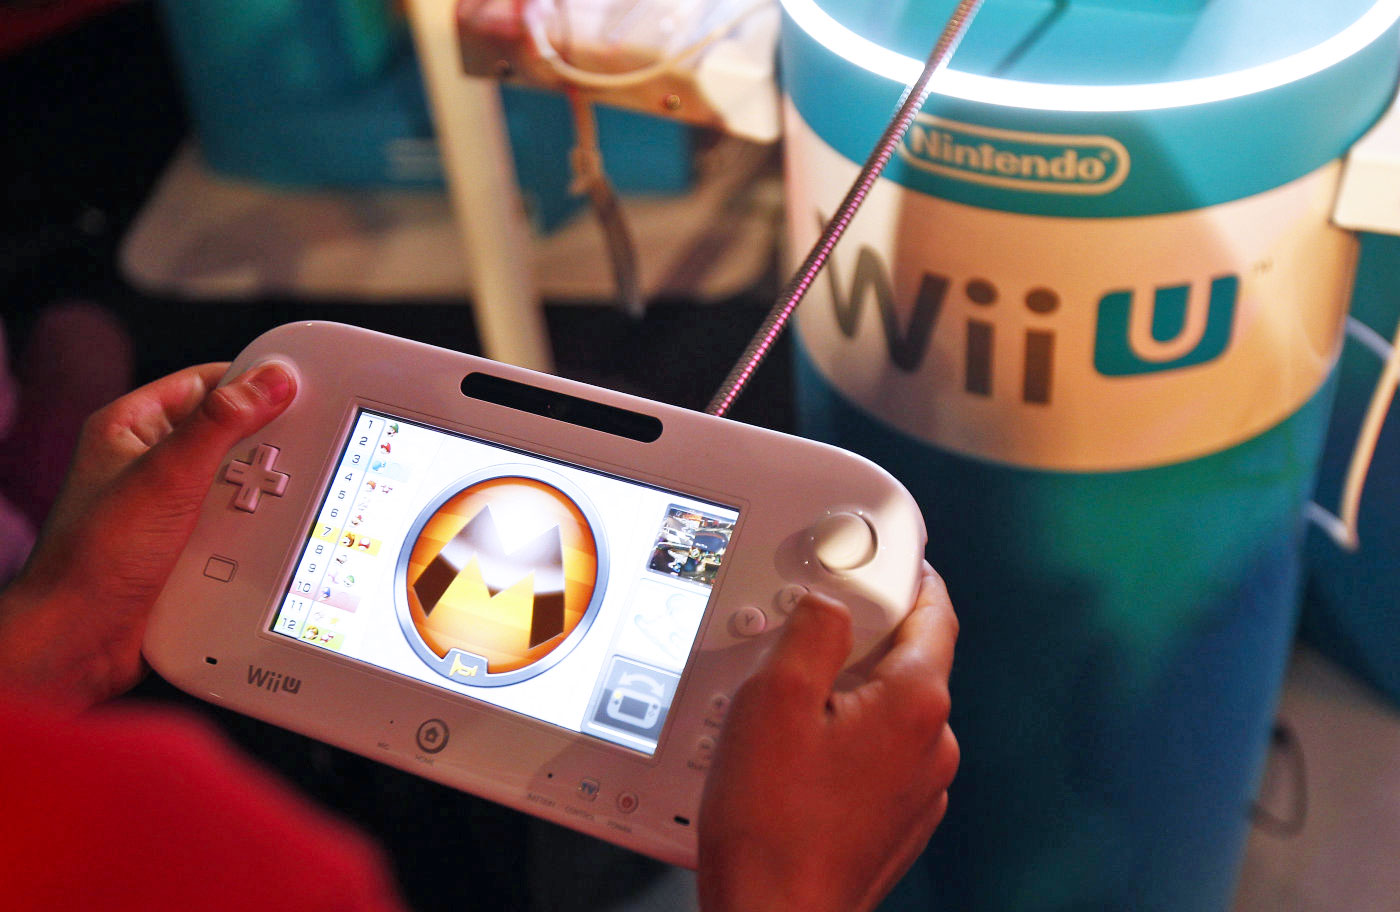 Nintendo might stop making the Wii U by March 2018